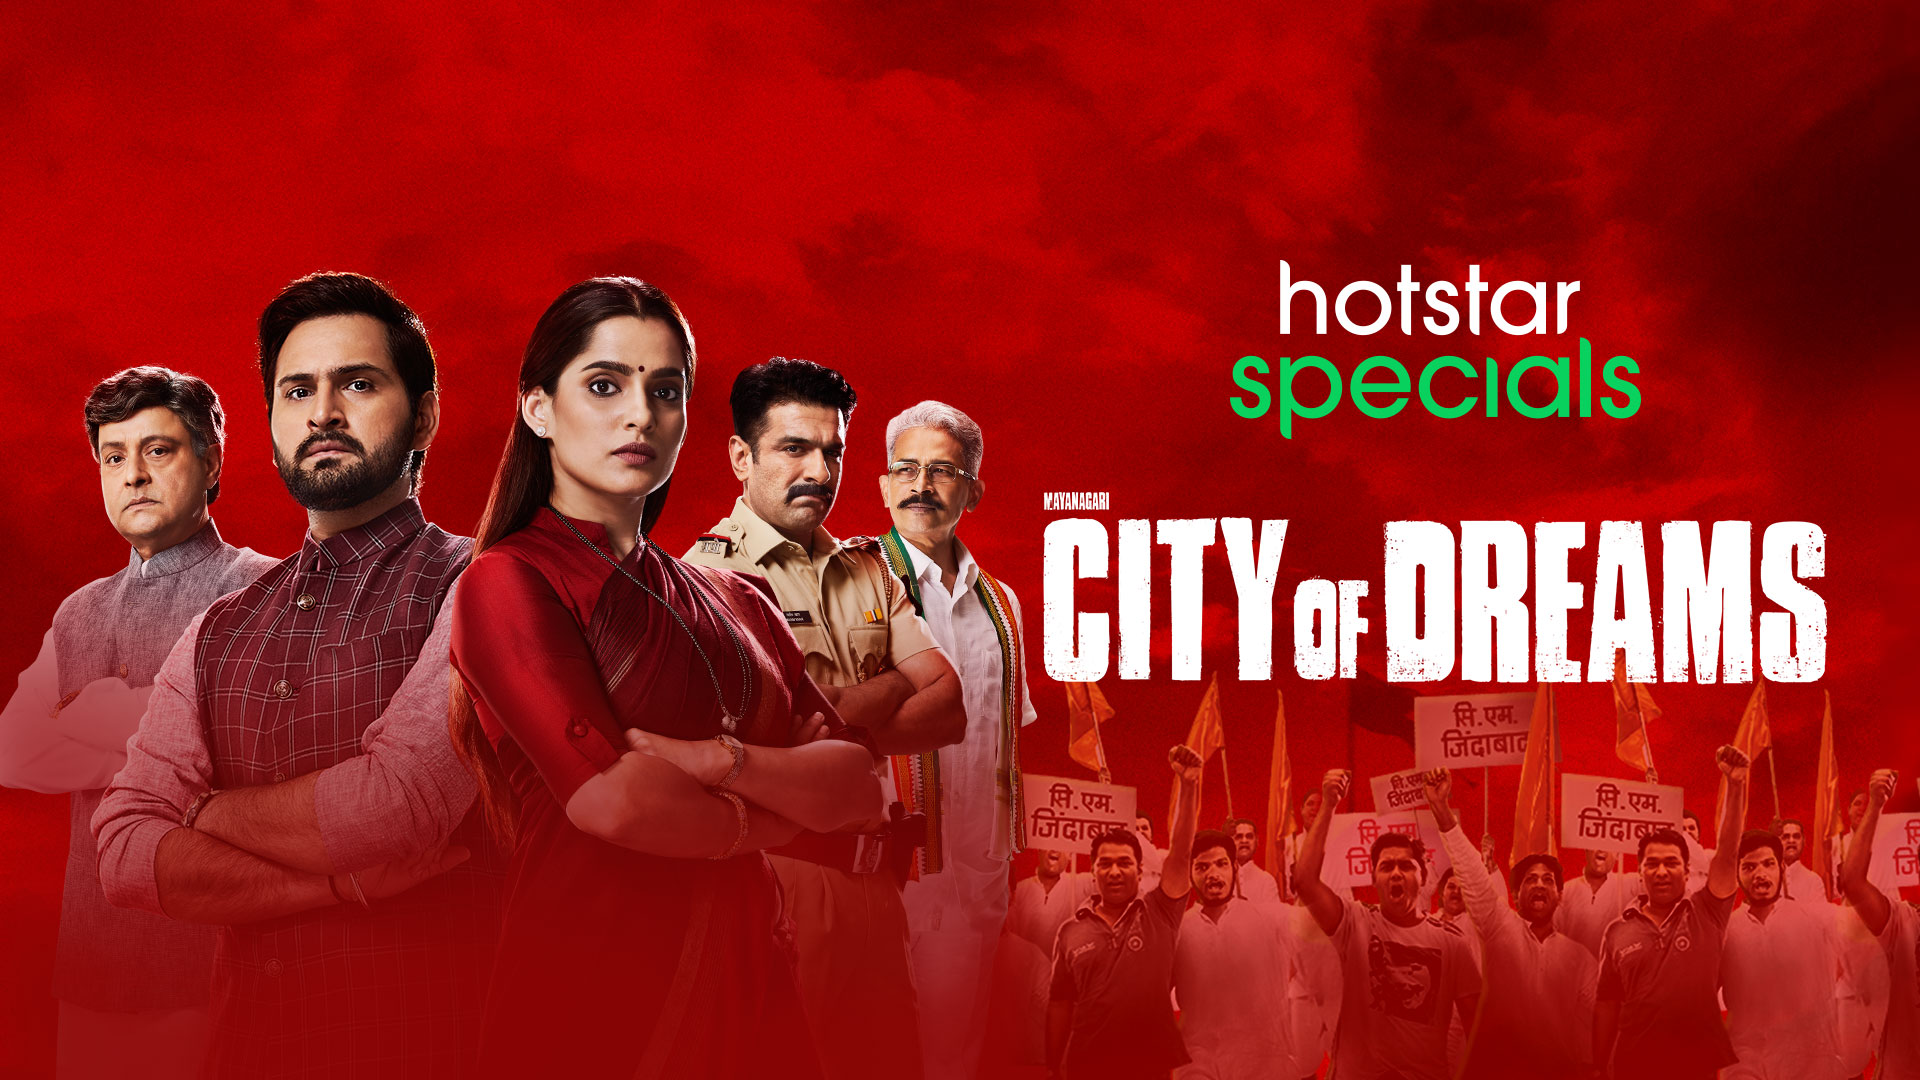 City of Dreams Season 2 All Episodes Watch Free Online @ 1080P